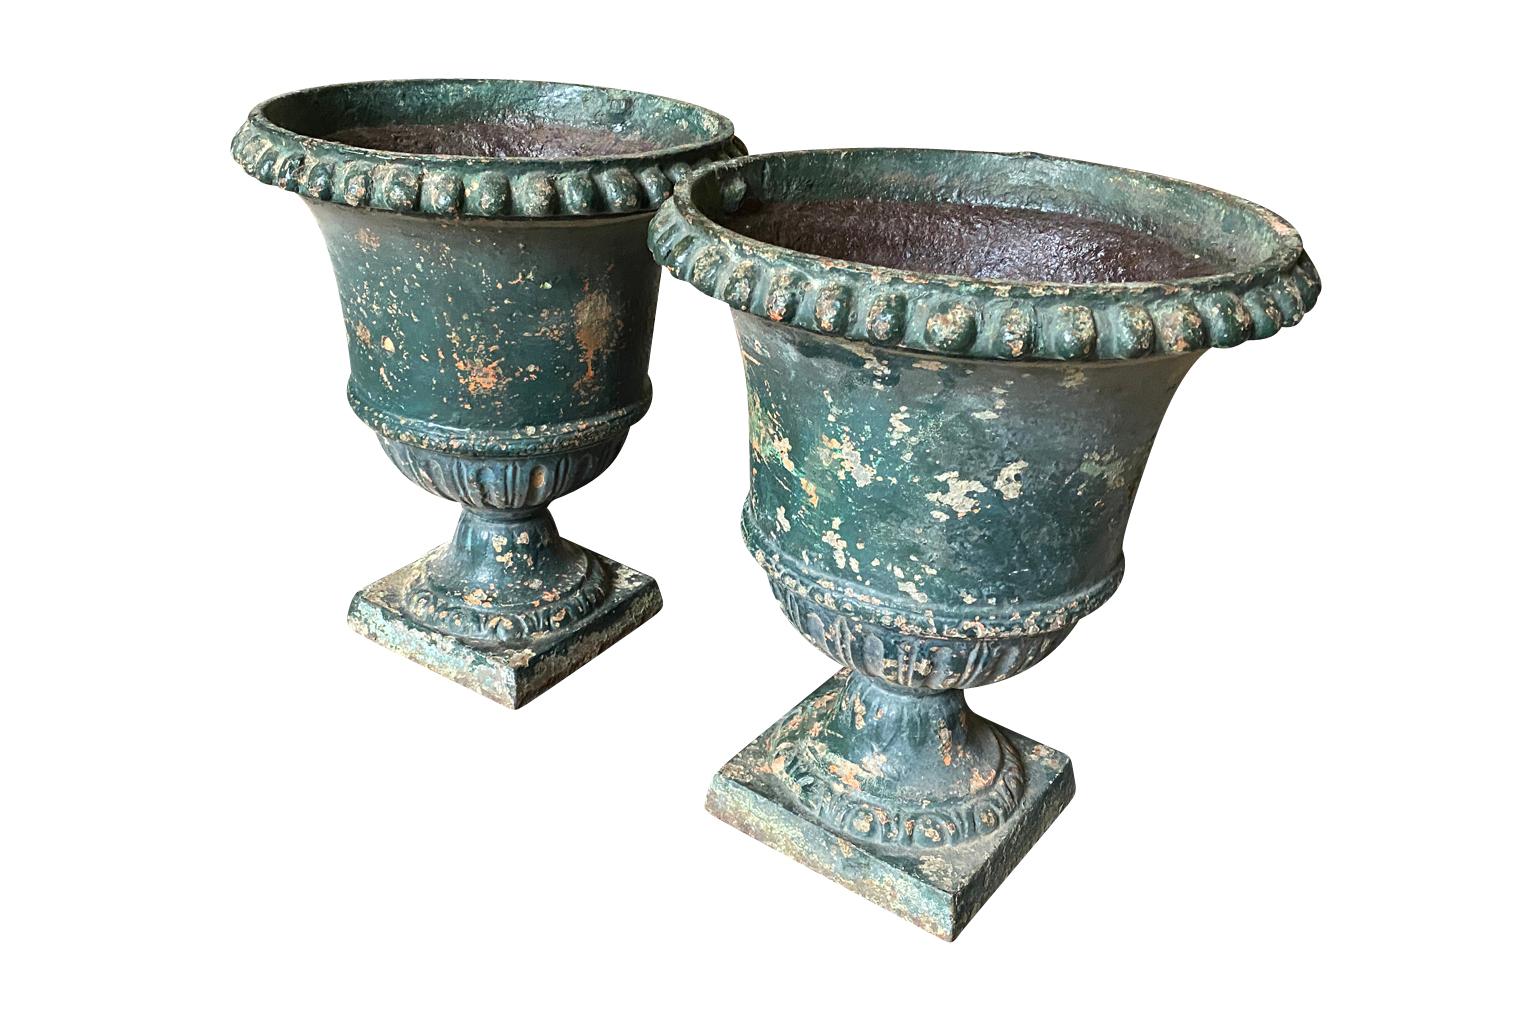 Pair Of French 18th Century Medici Urns  In Good Condition For Sale In Atlanta, GA